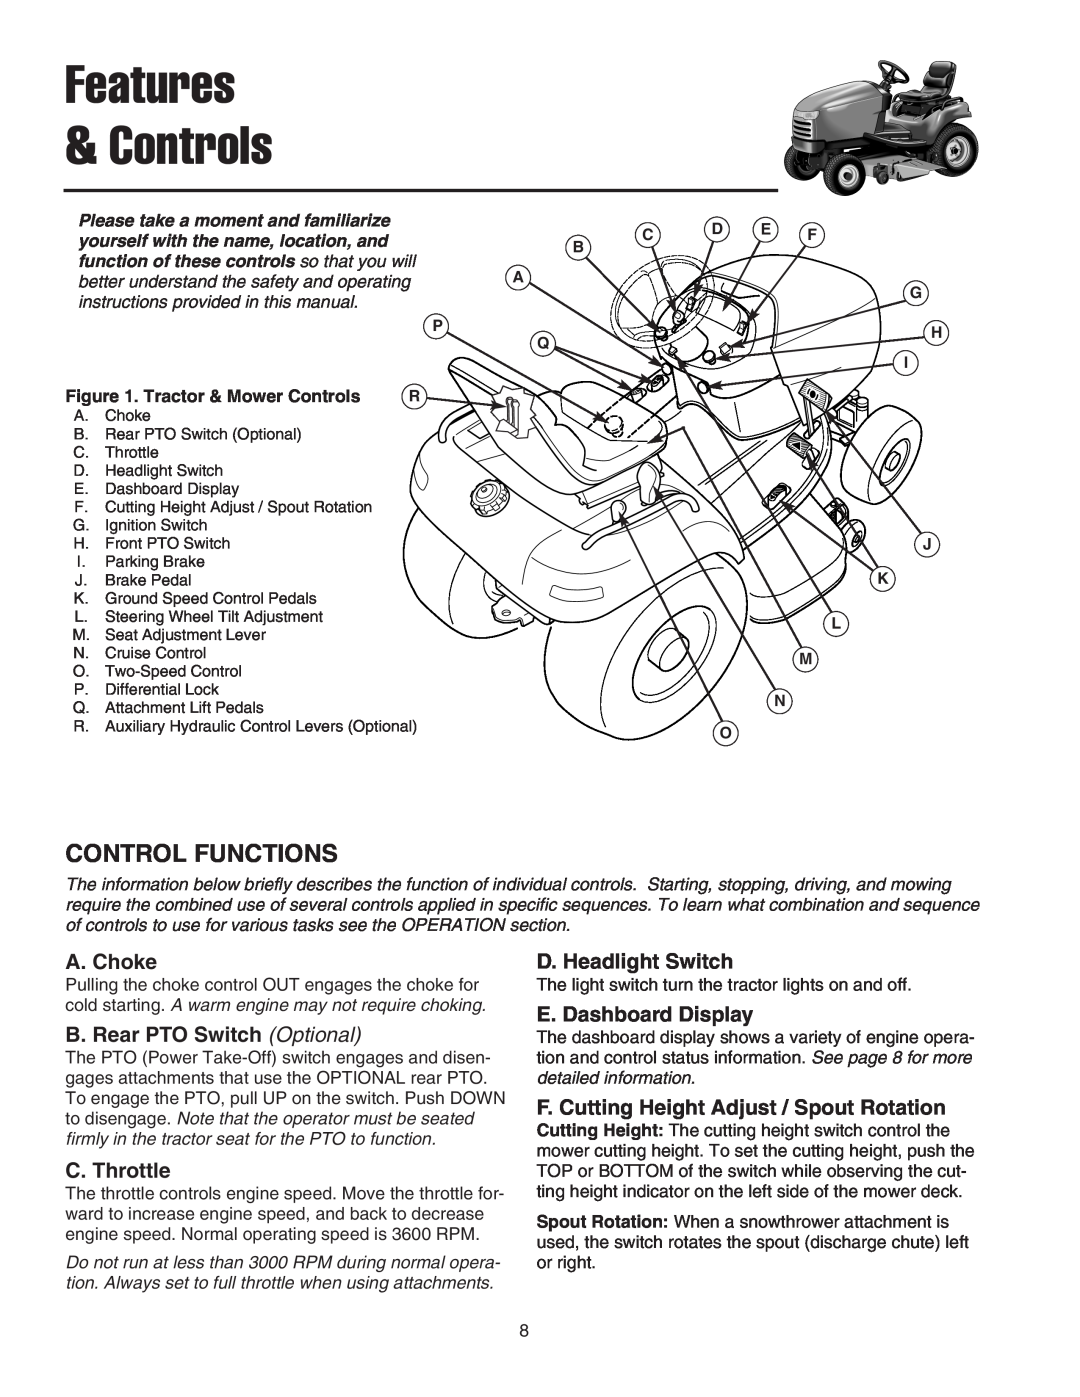 Simplicity 1693136, 1693738 Features & Controls, Control Functions, A. Choke, B. Rear PTO Switch Optional, C. Throttle 